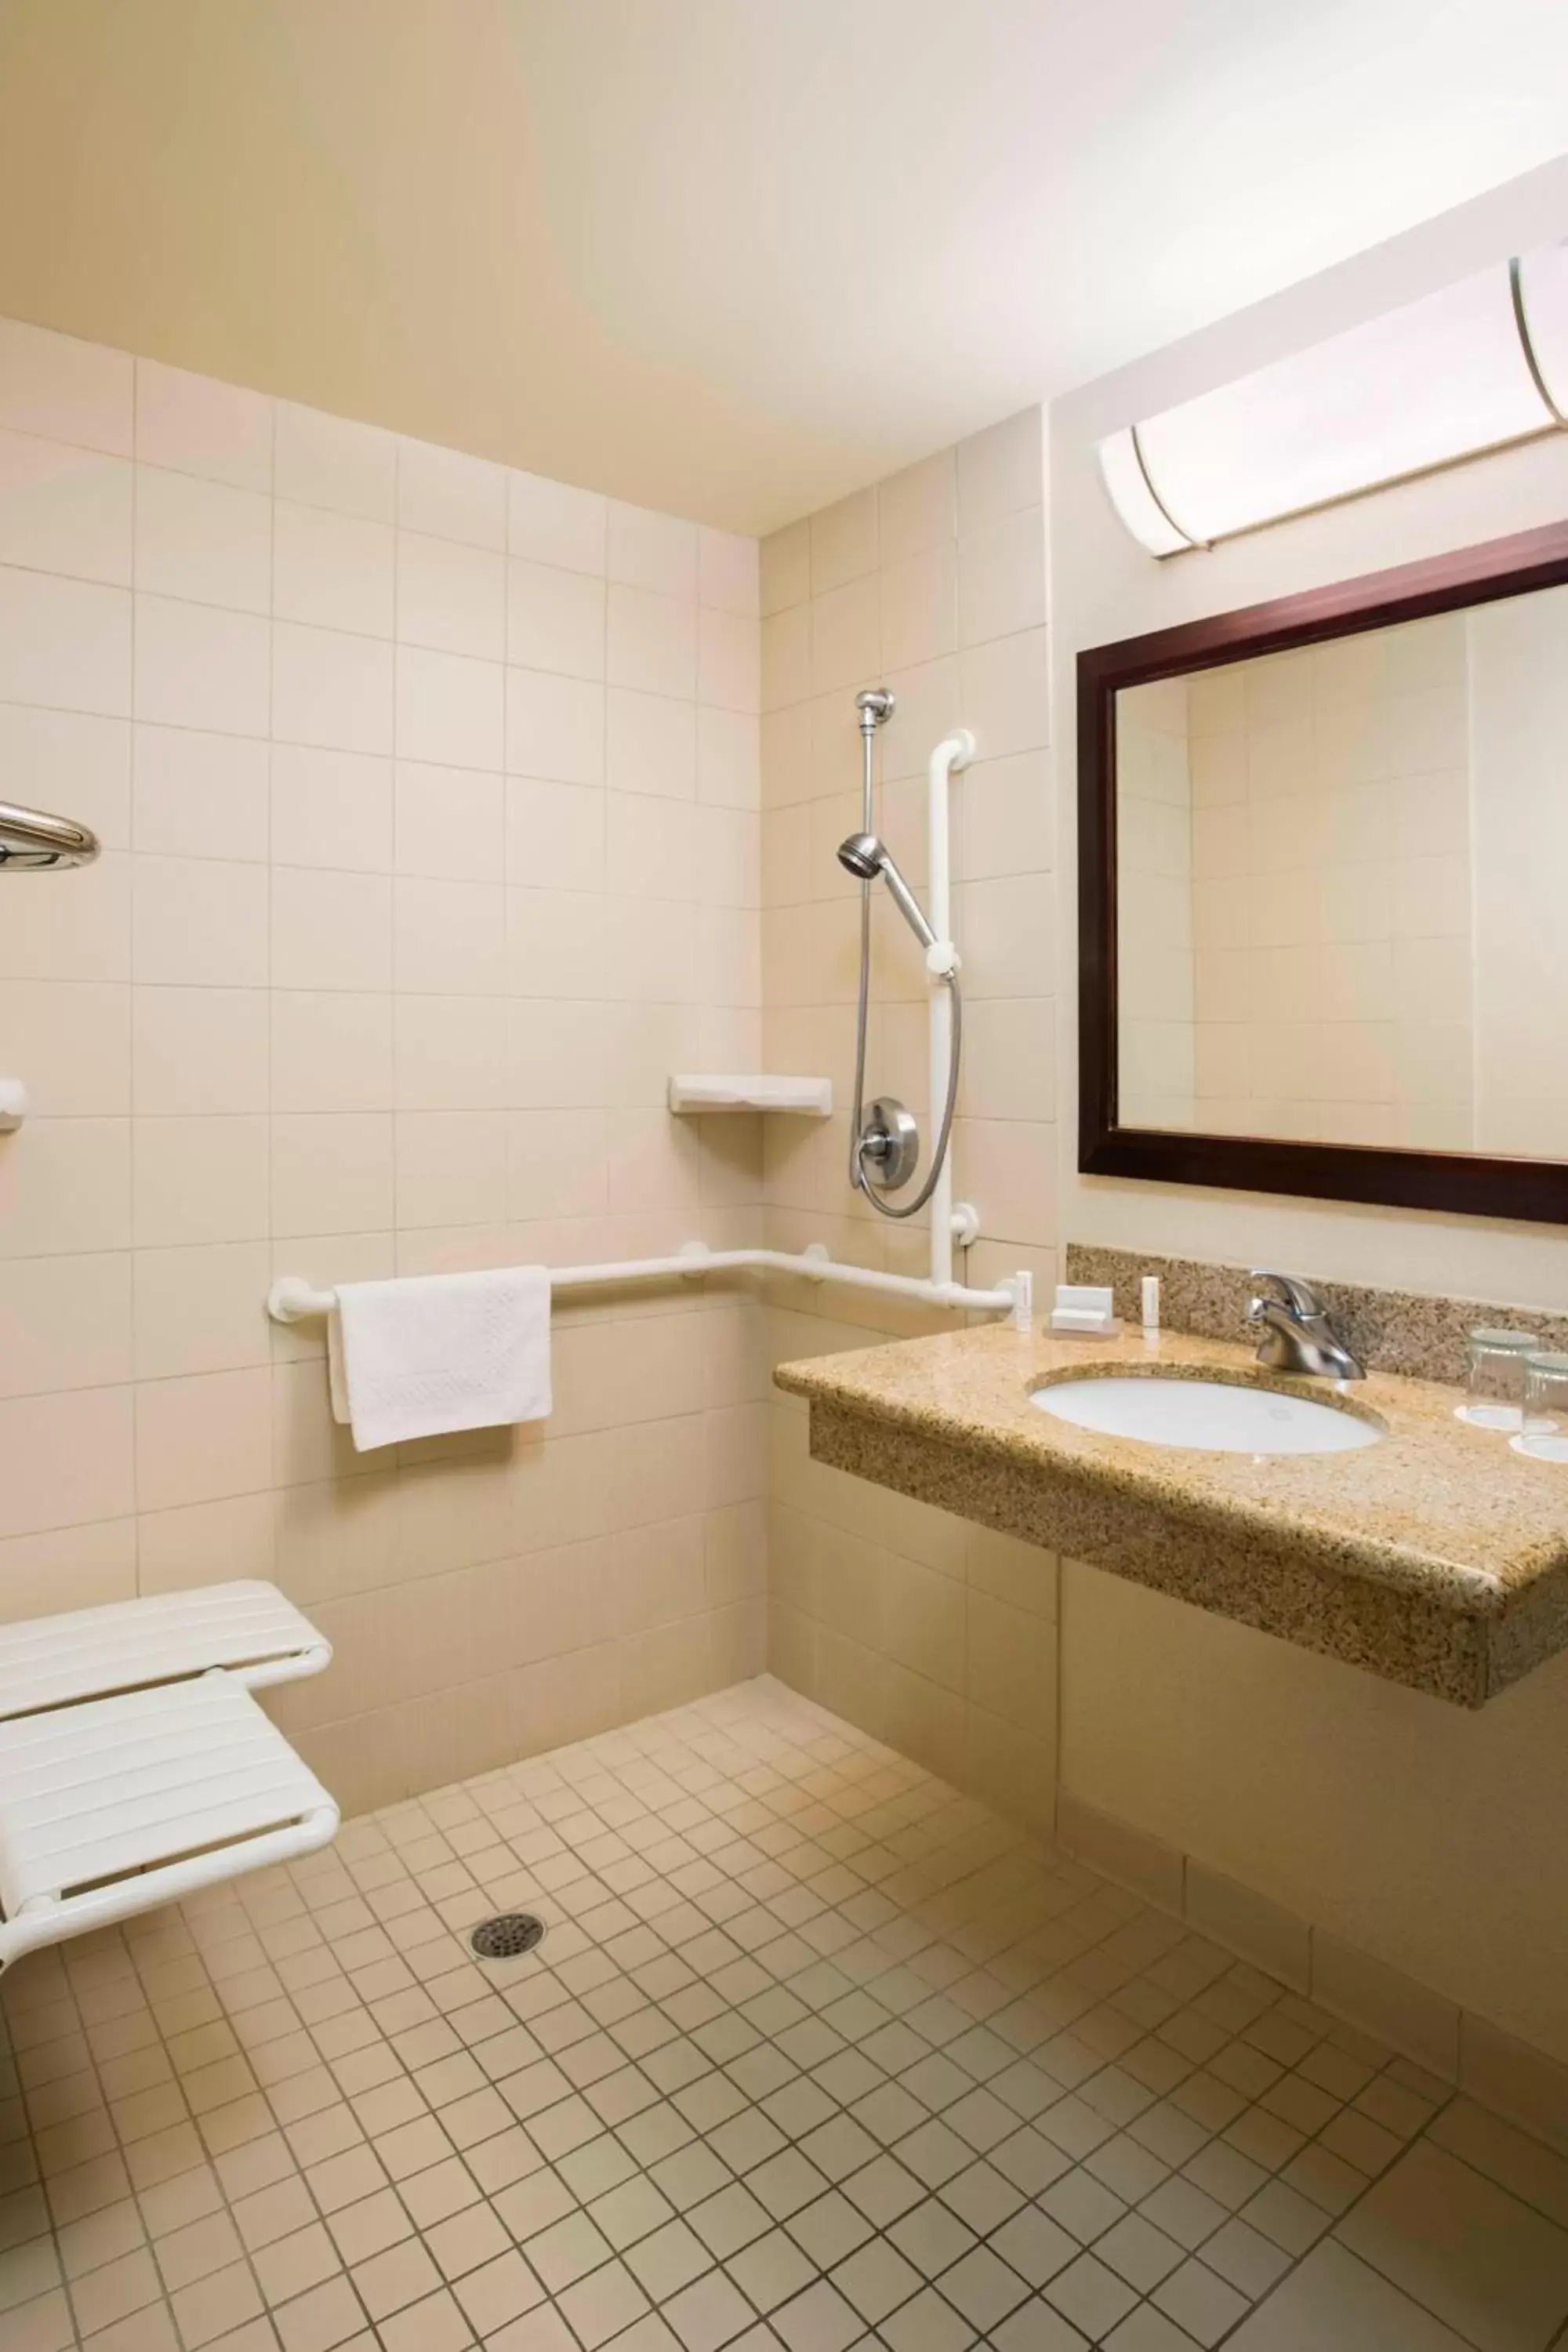 Bathroom in SpringHill Suites by Marriott Omaha East, Council Bluffs, IA